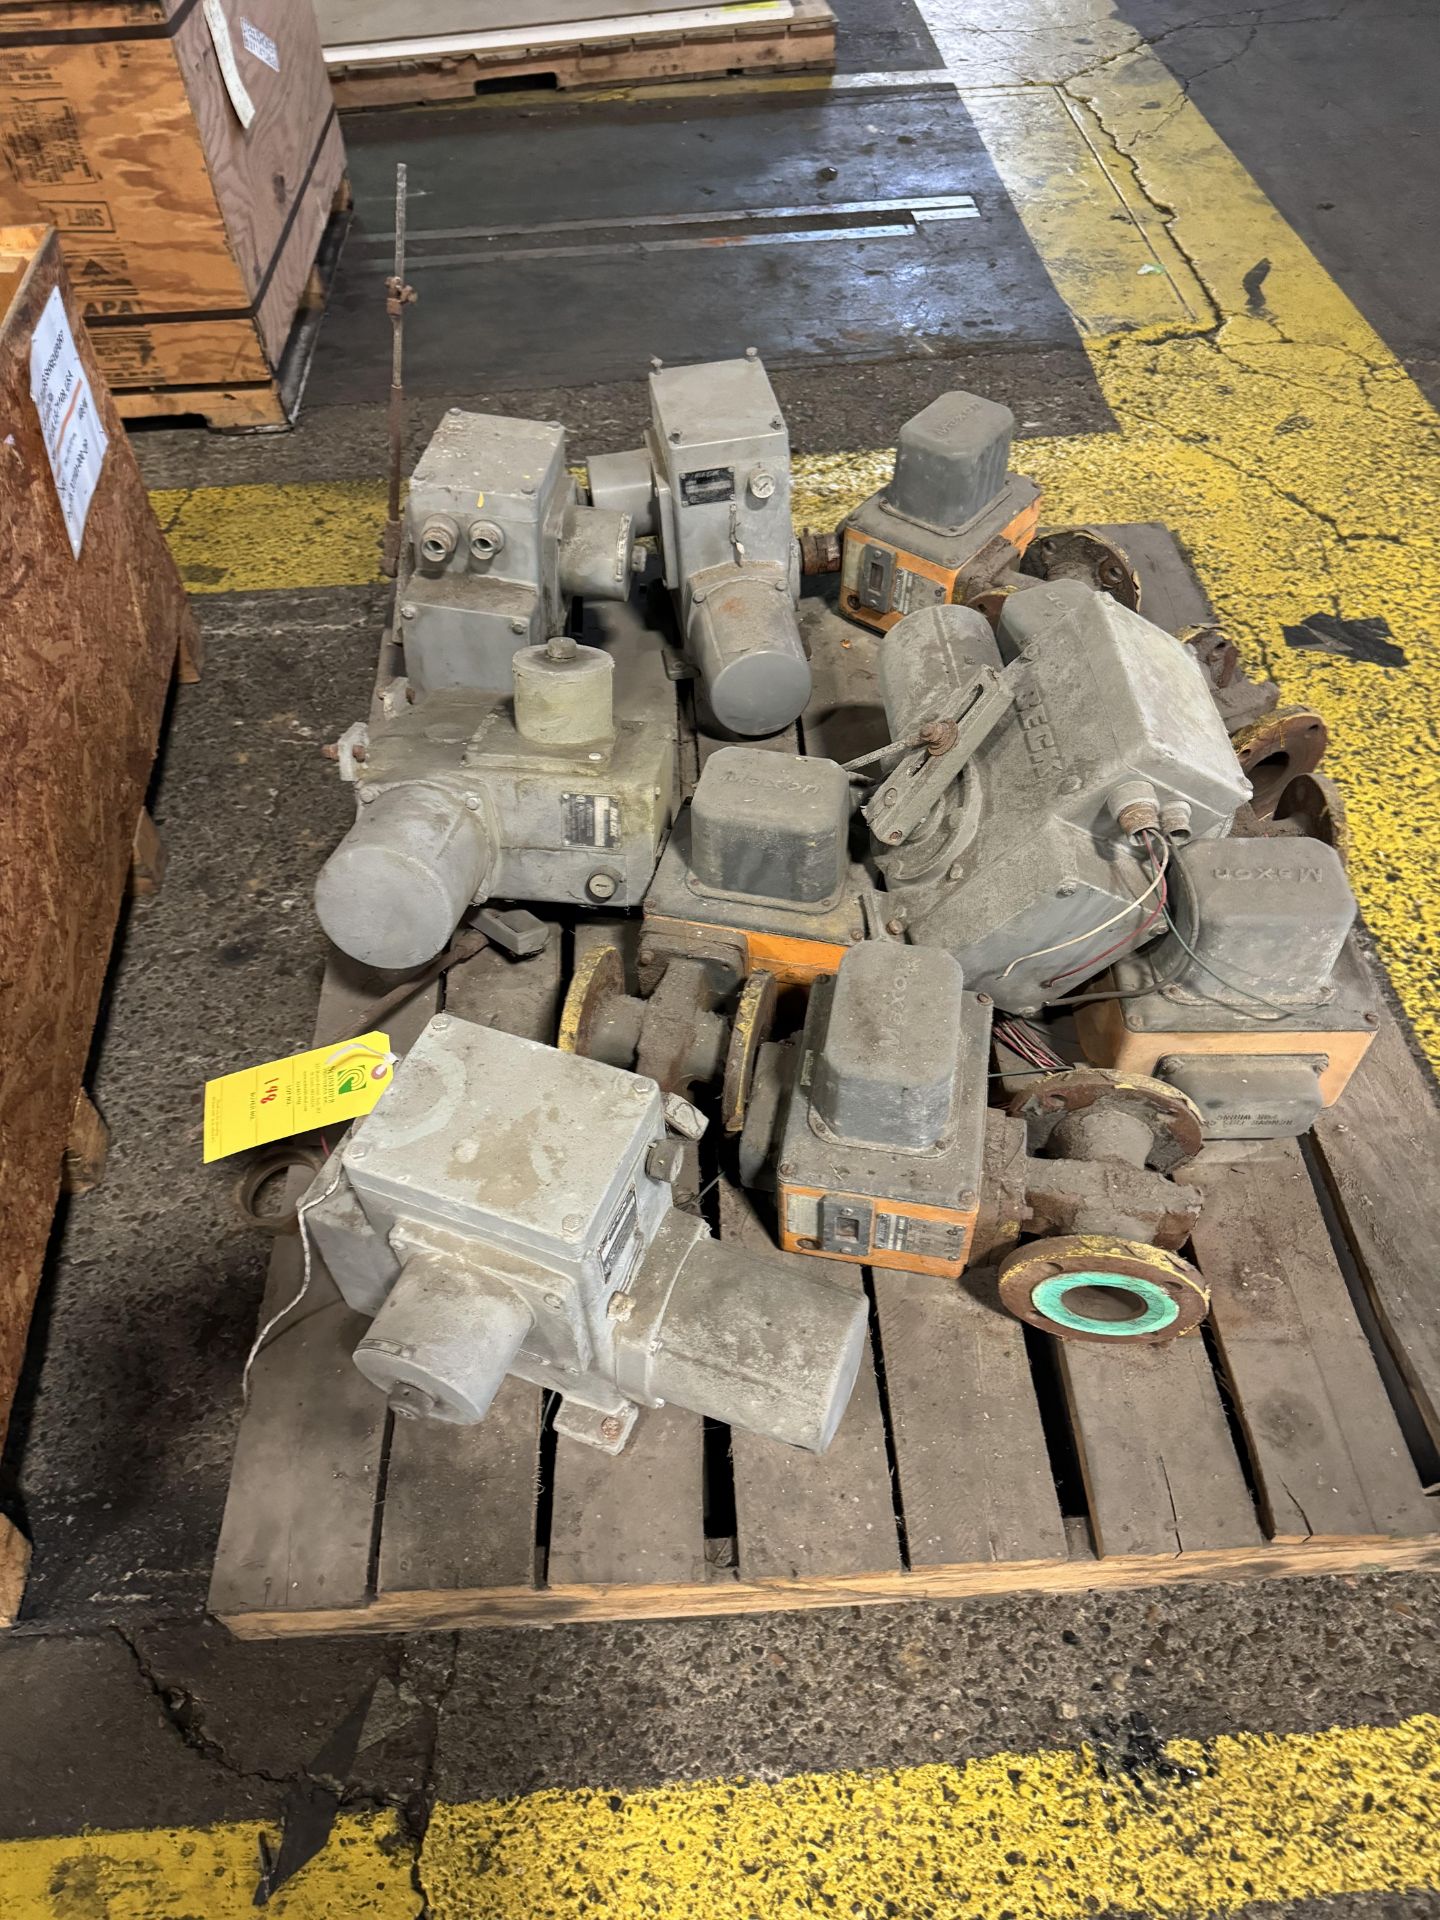 Pallet of Miscellaneous Actuator Valves, Rigging/ Removal Fee - $50